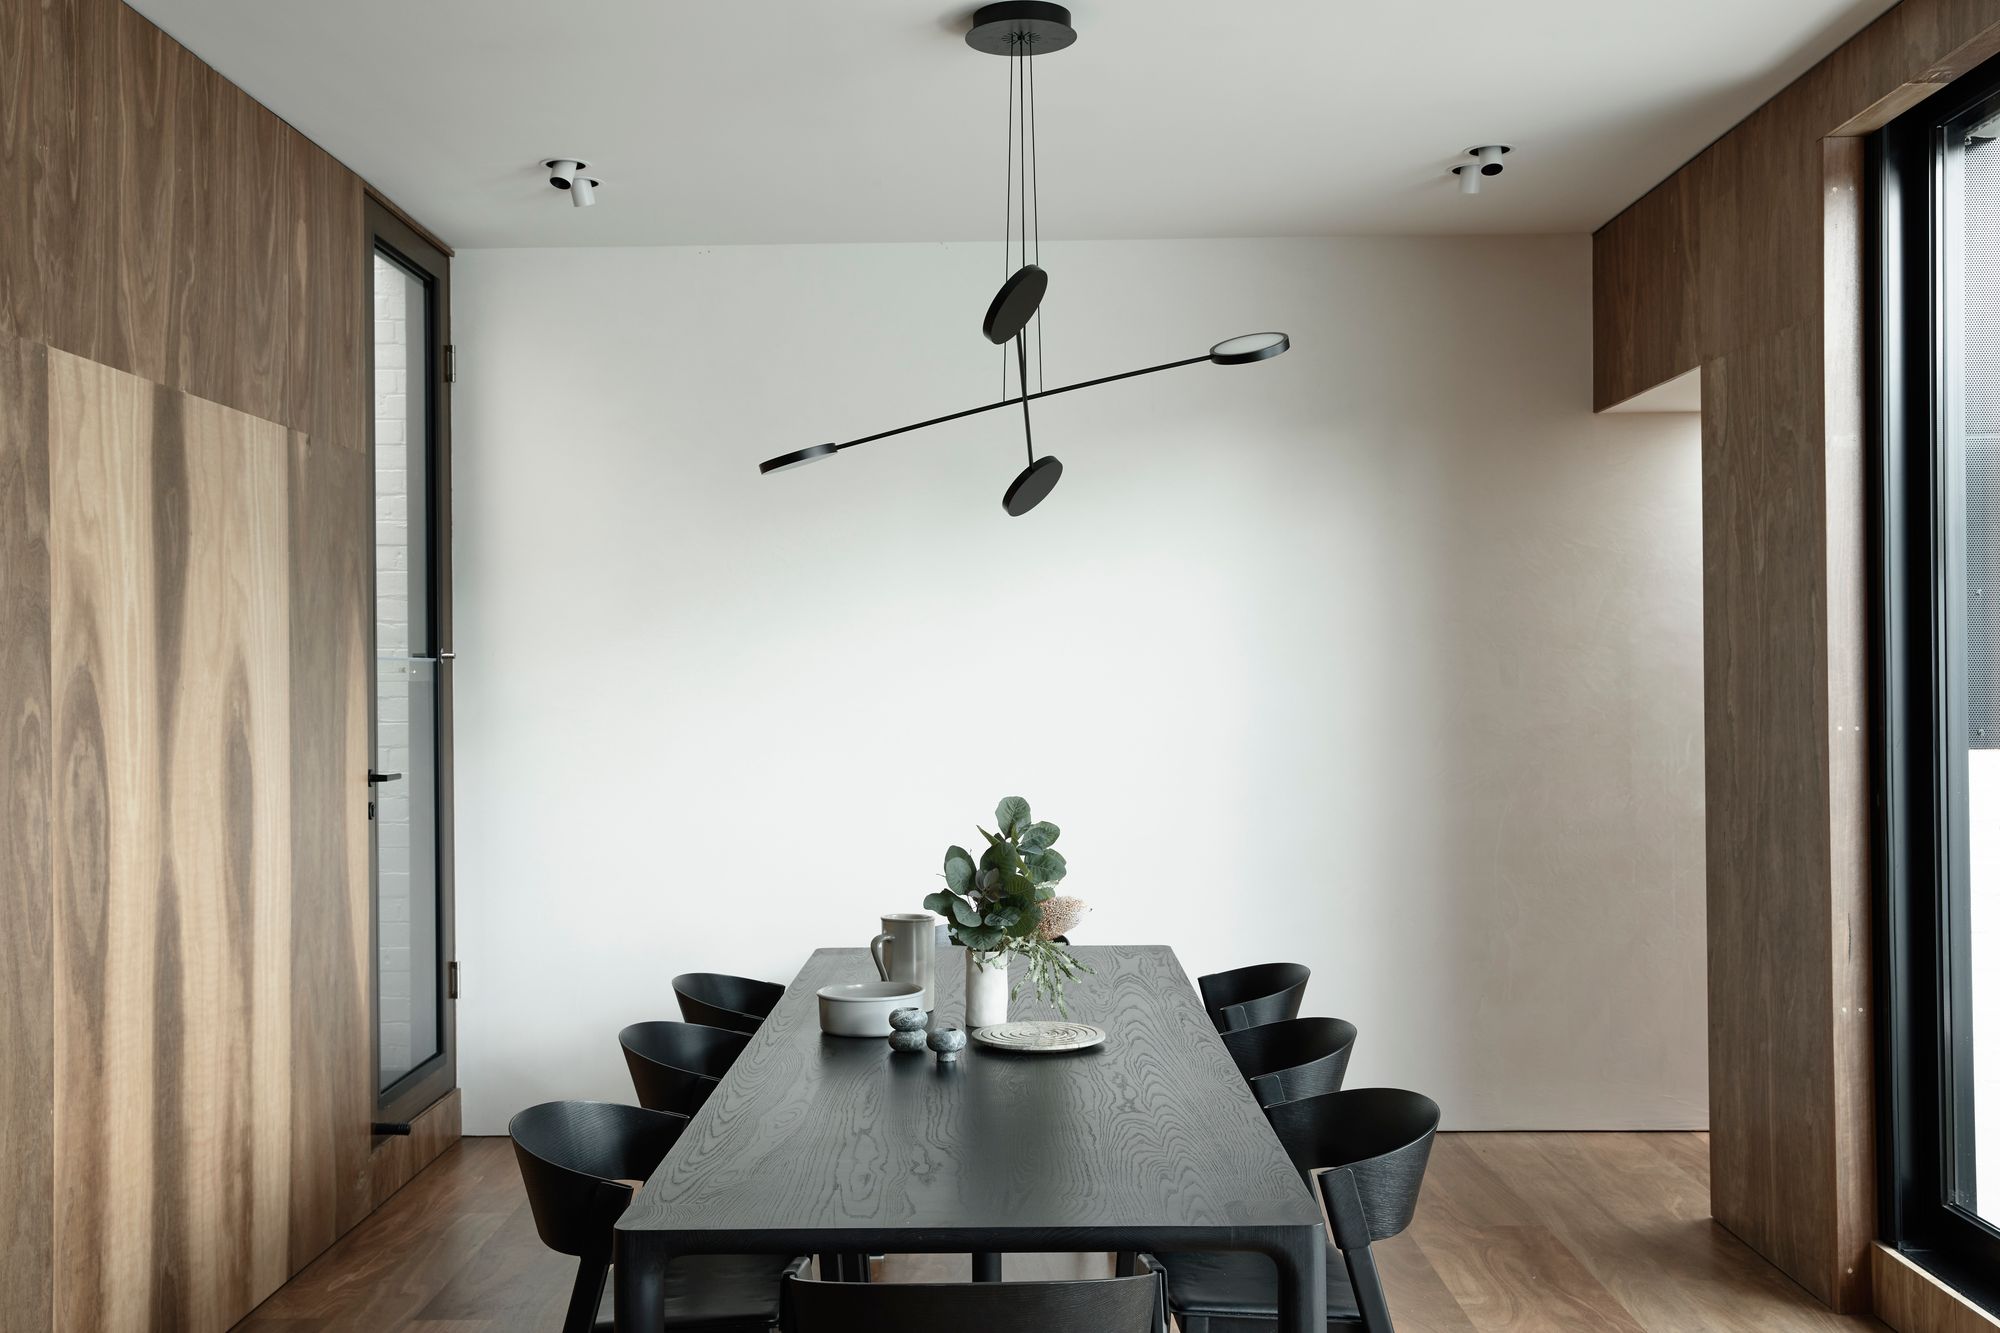 Carlton North Residence by Project 12 Architecture. Dining room view, featuring 6-seater dining table.